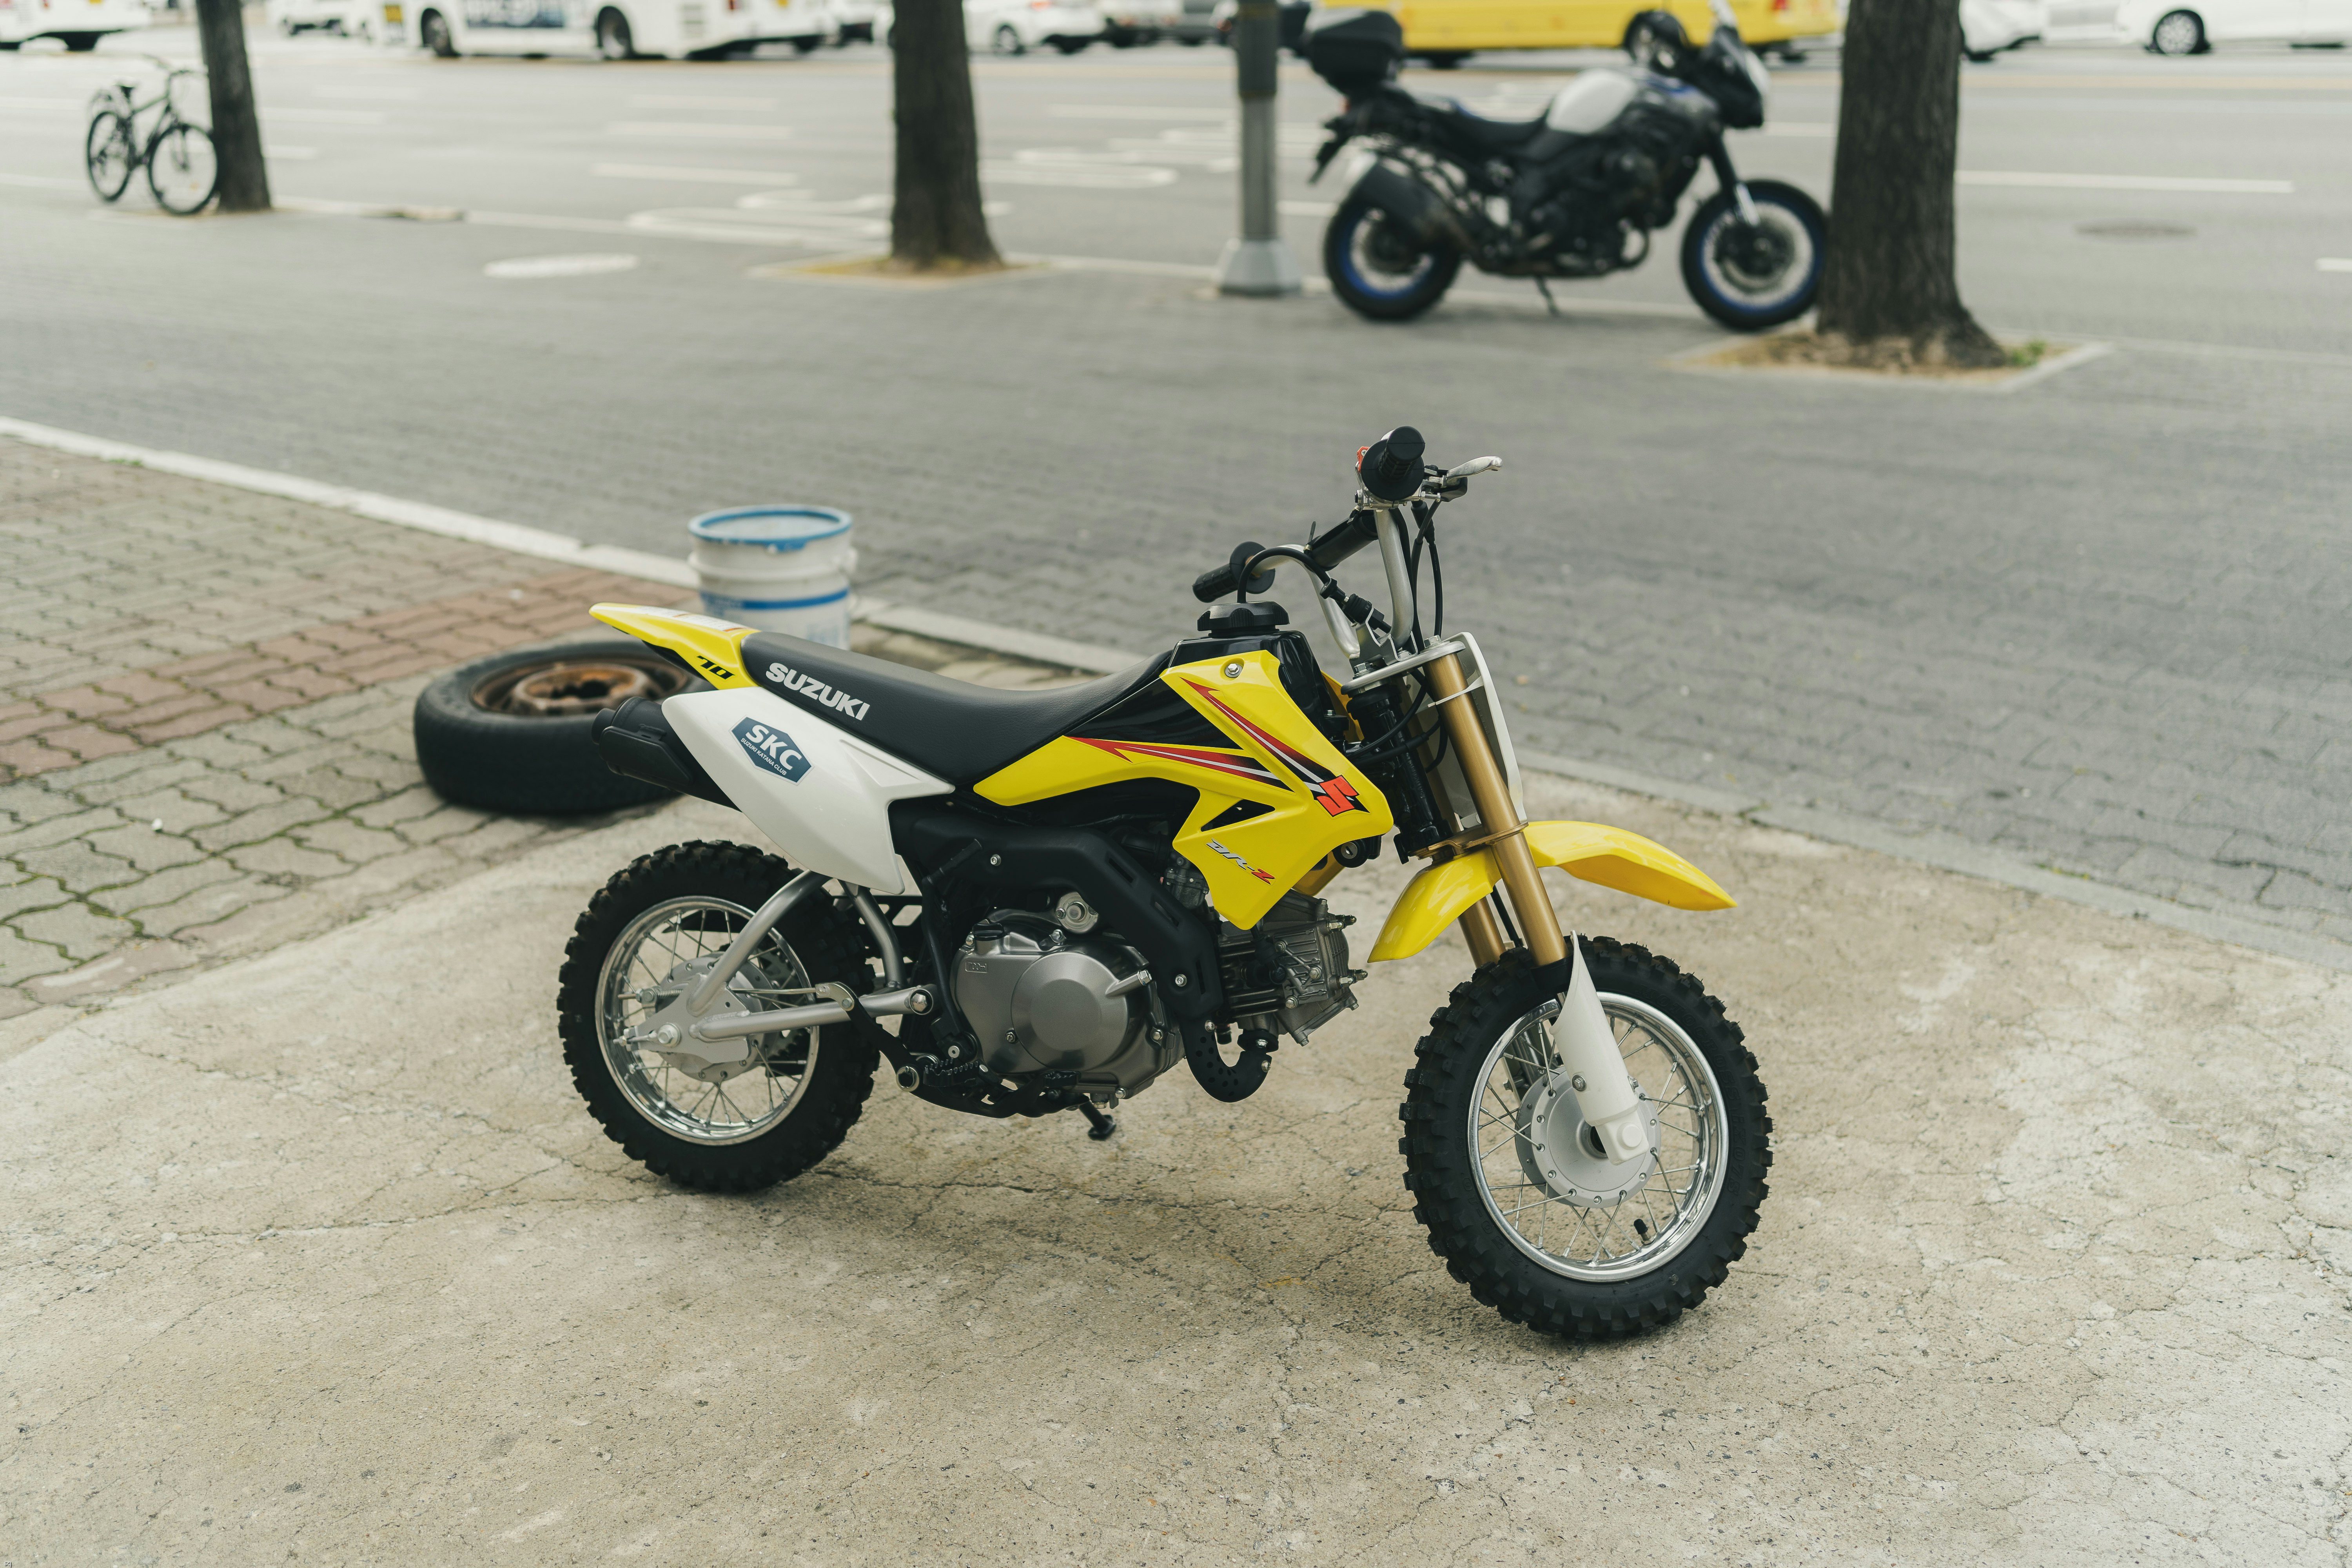 yellow and black sports bike on road during daytime